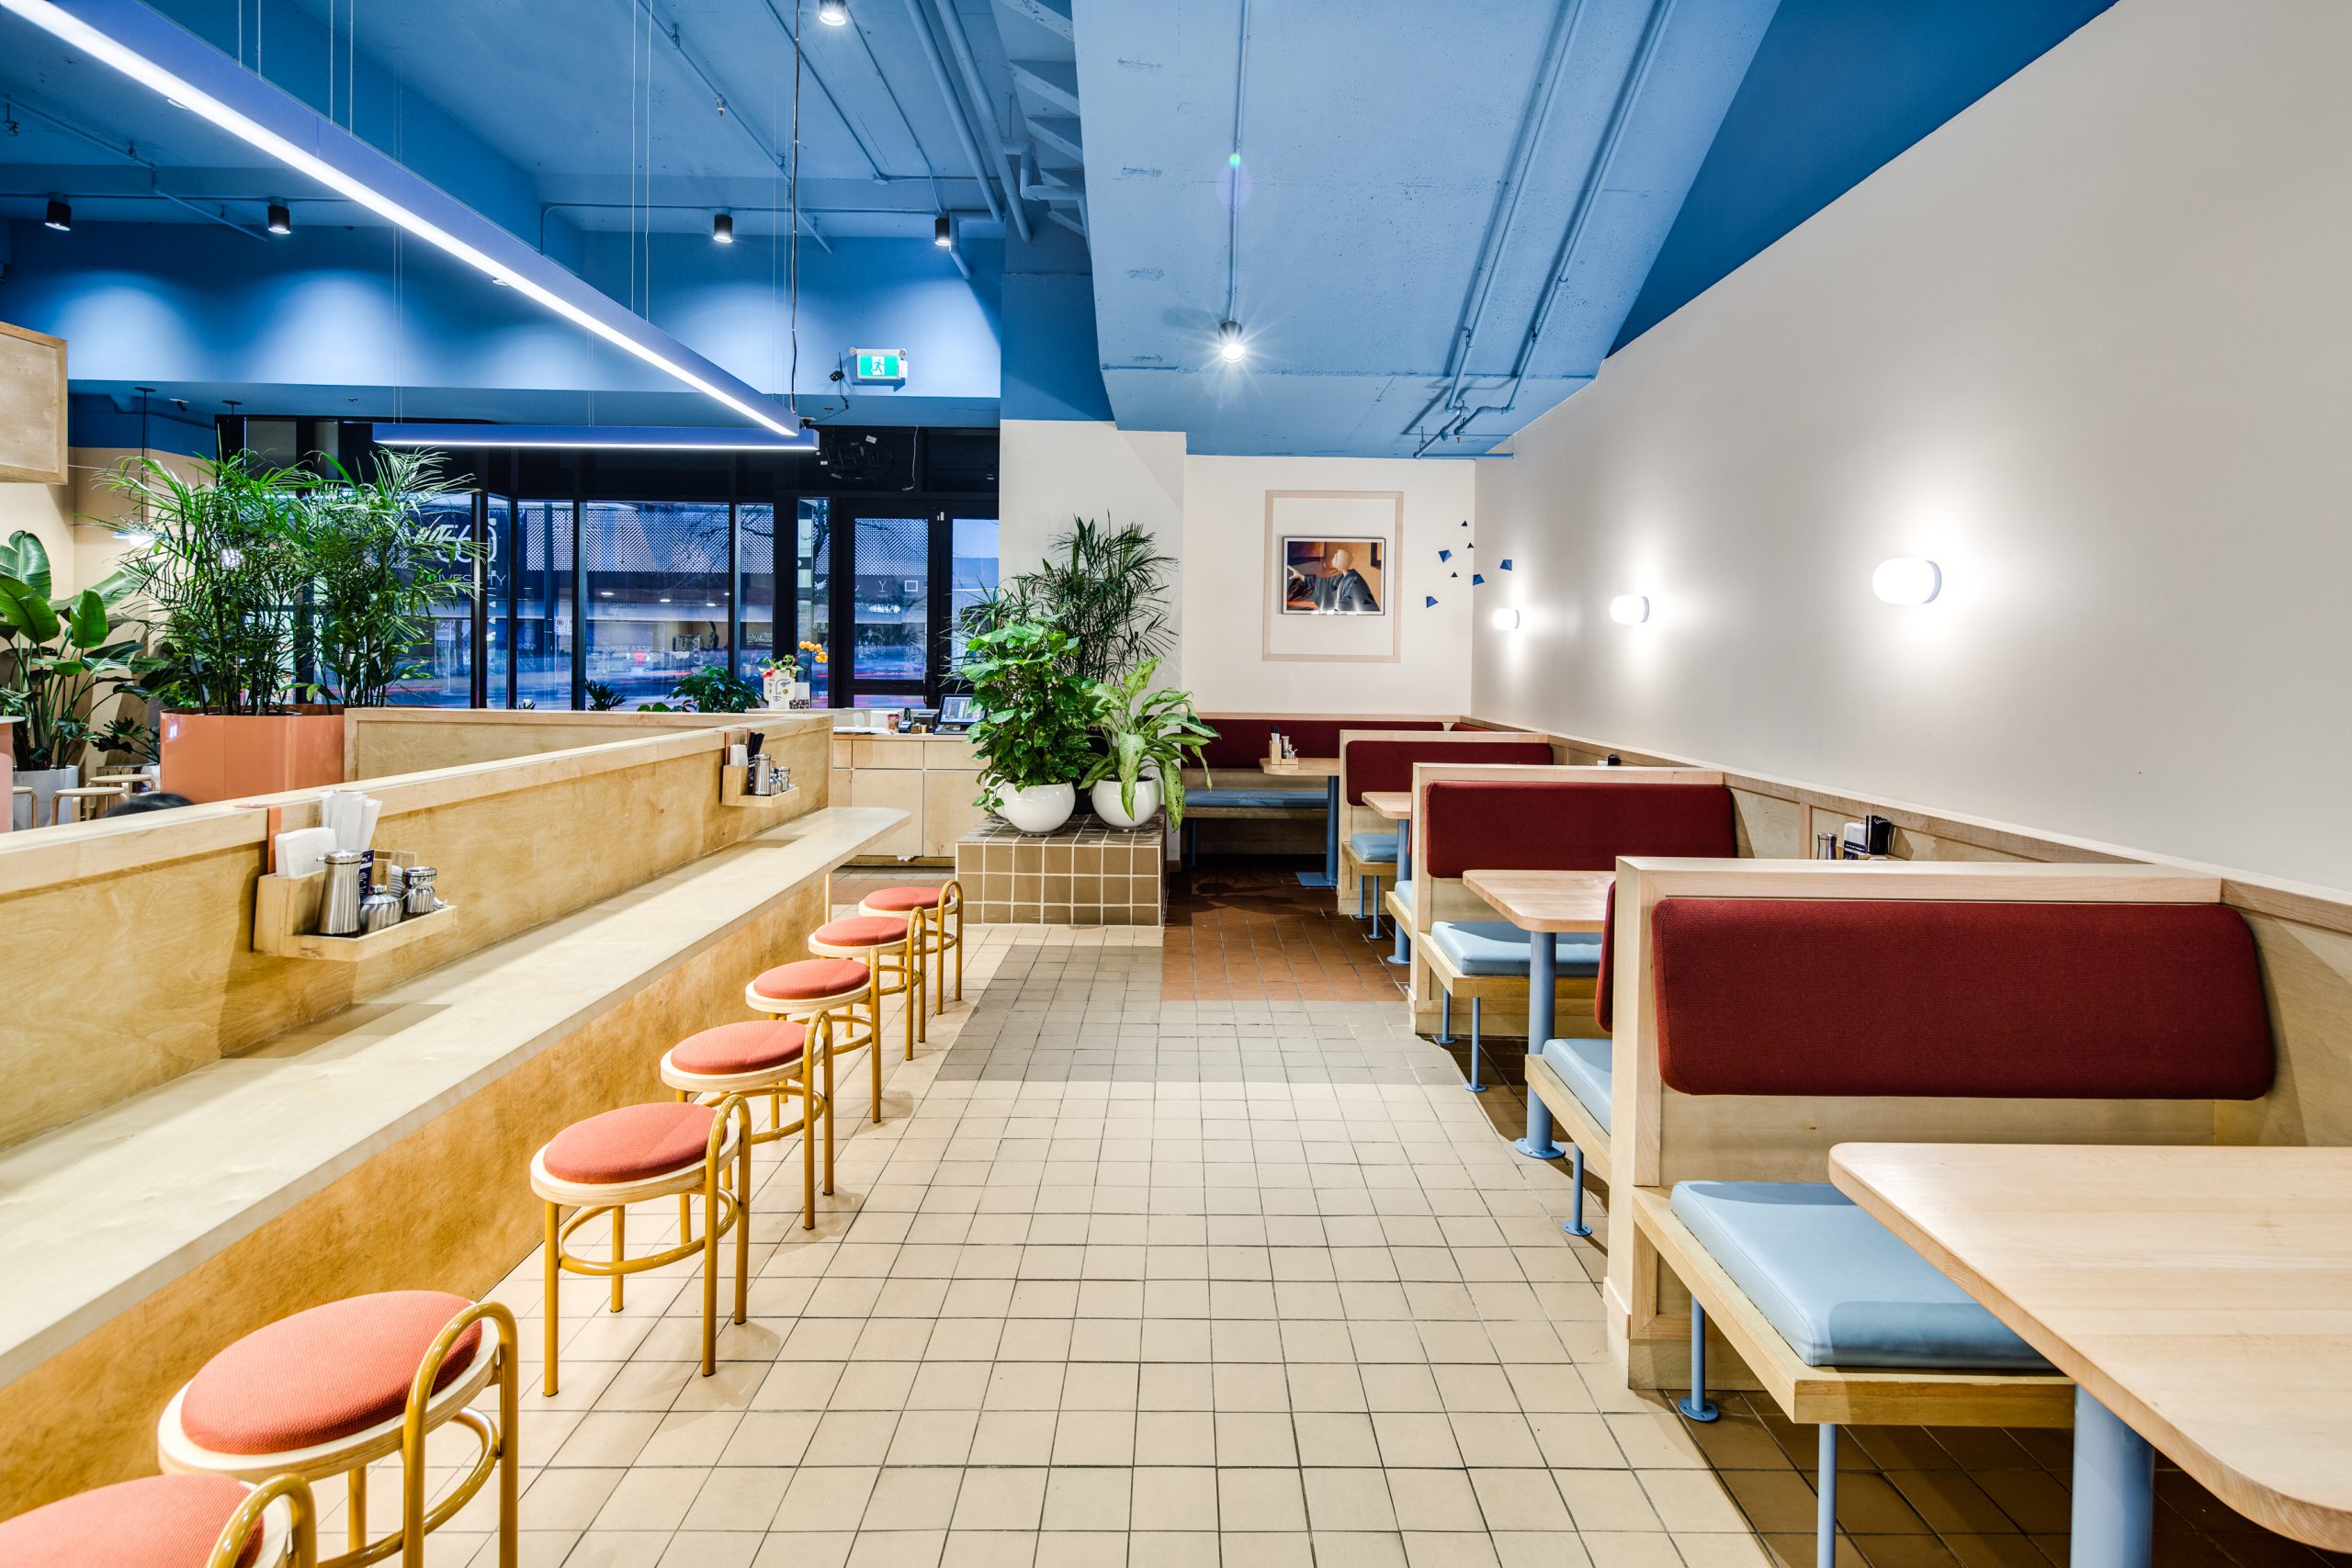 Kokoro Mazesoba restaurant interior showing customer seating, bar, white walls and blue ceiling by Cutler in Vancouver BC